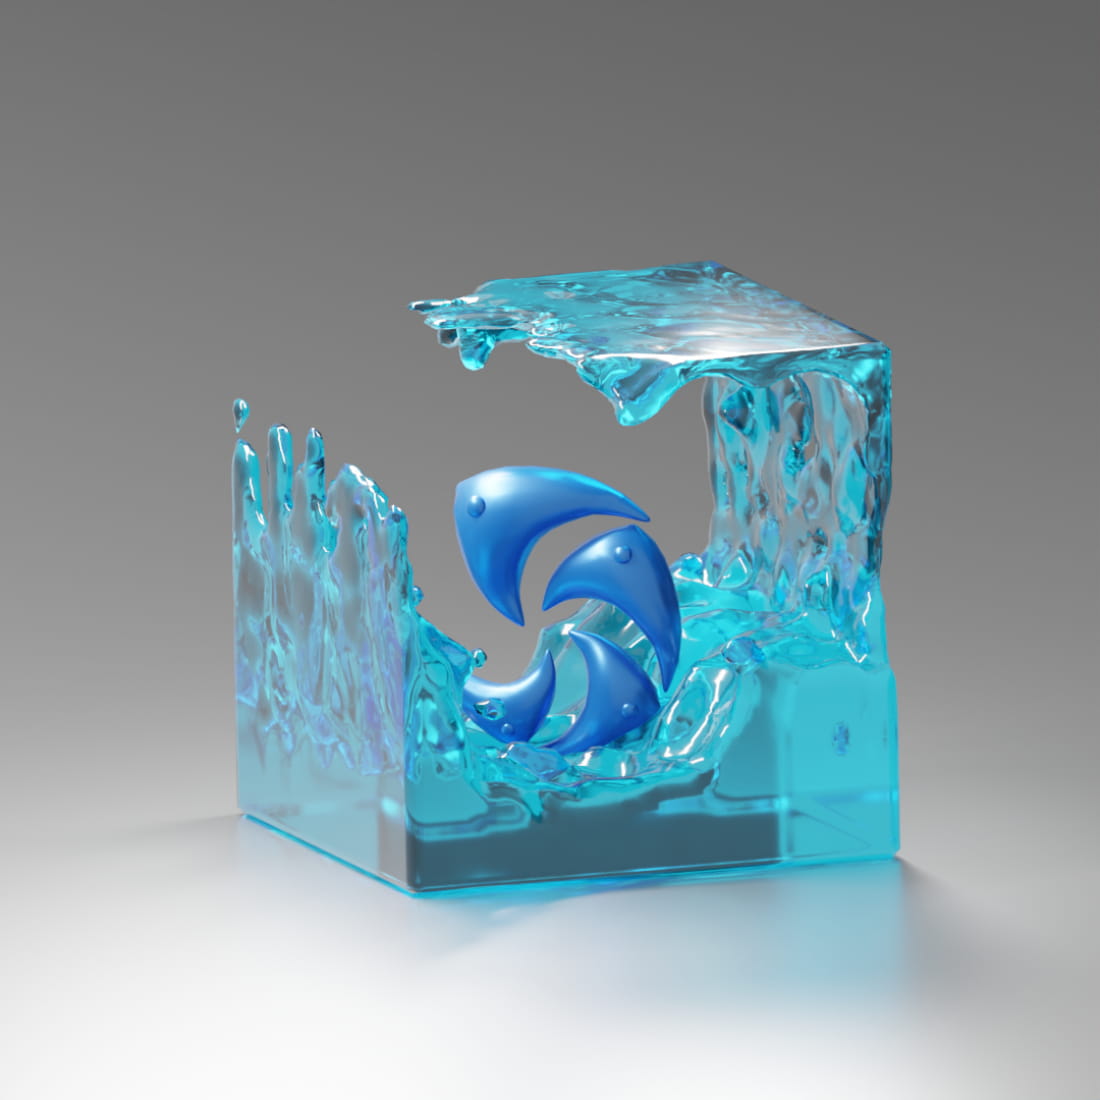 fluid-animation-made-with-blender